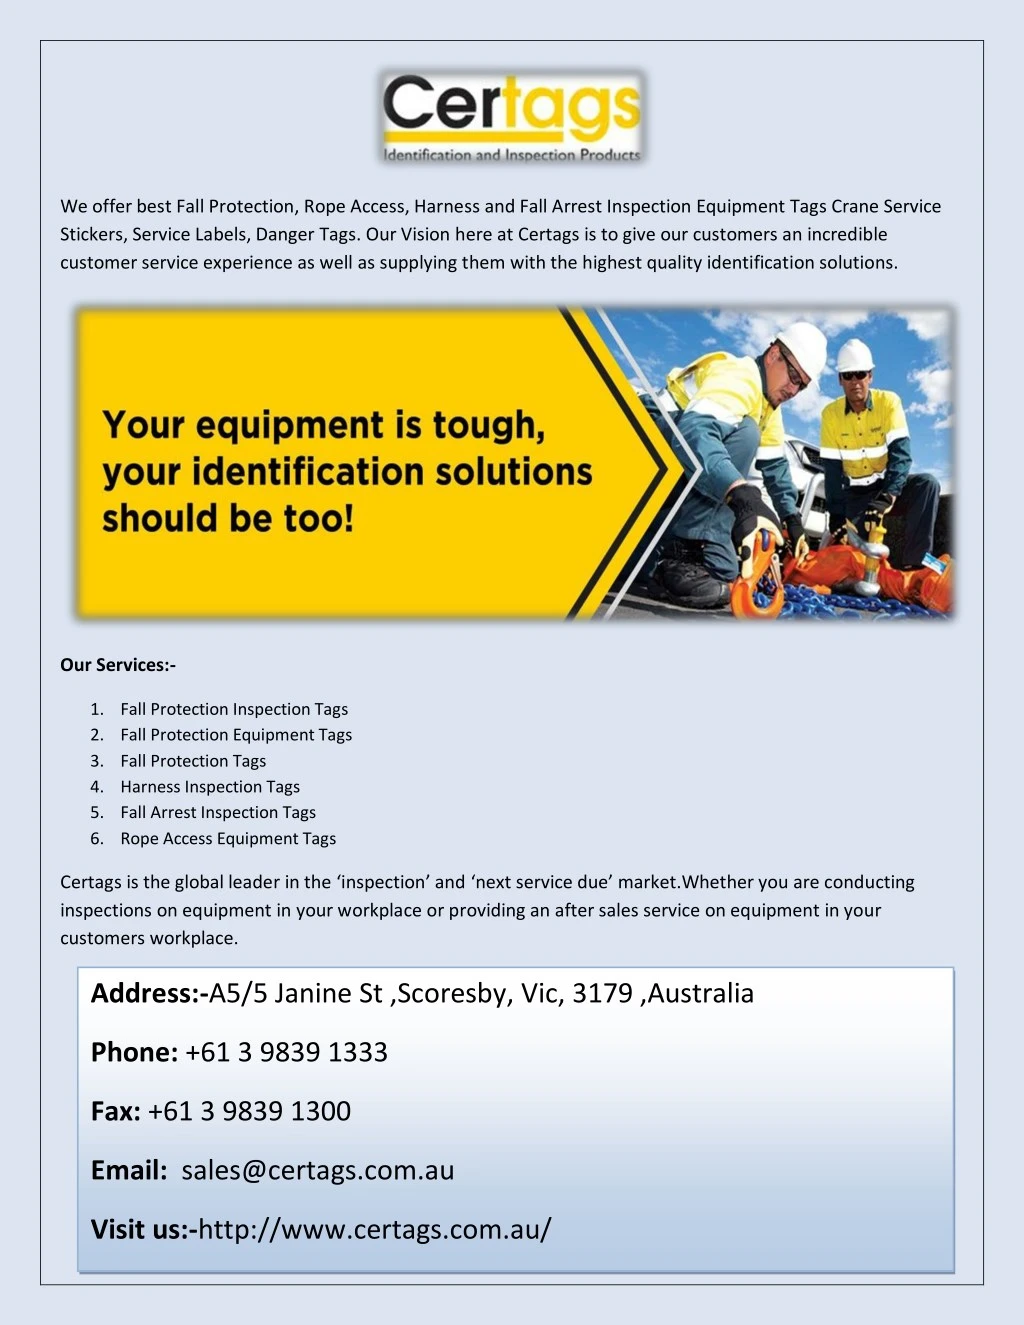 PPT - certags - Fall Protection Inspection Tags , Equipment Tags PowerPoint Presentation - ID ...